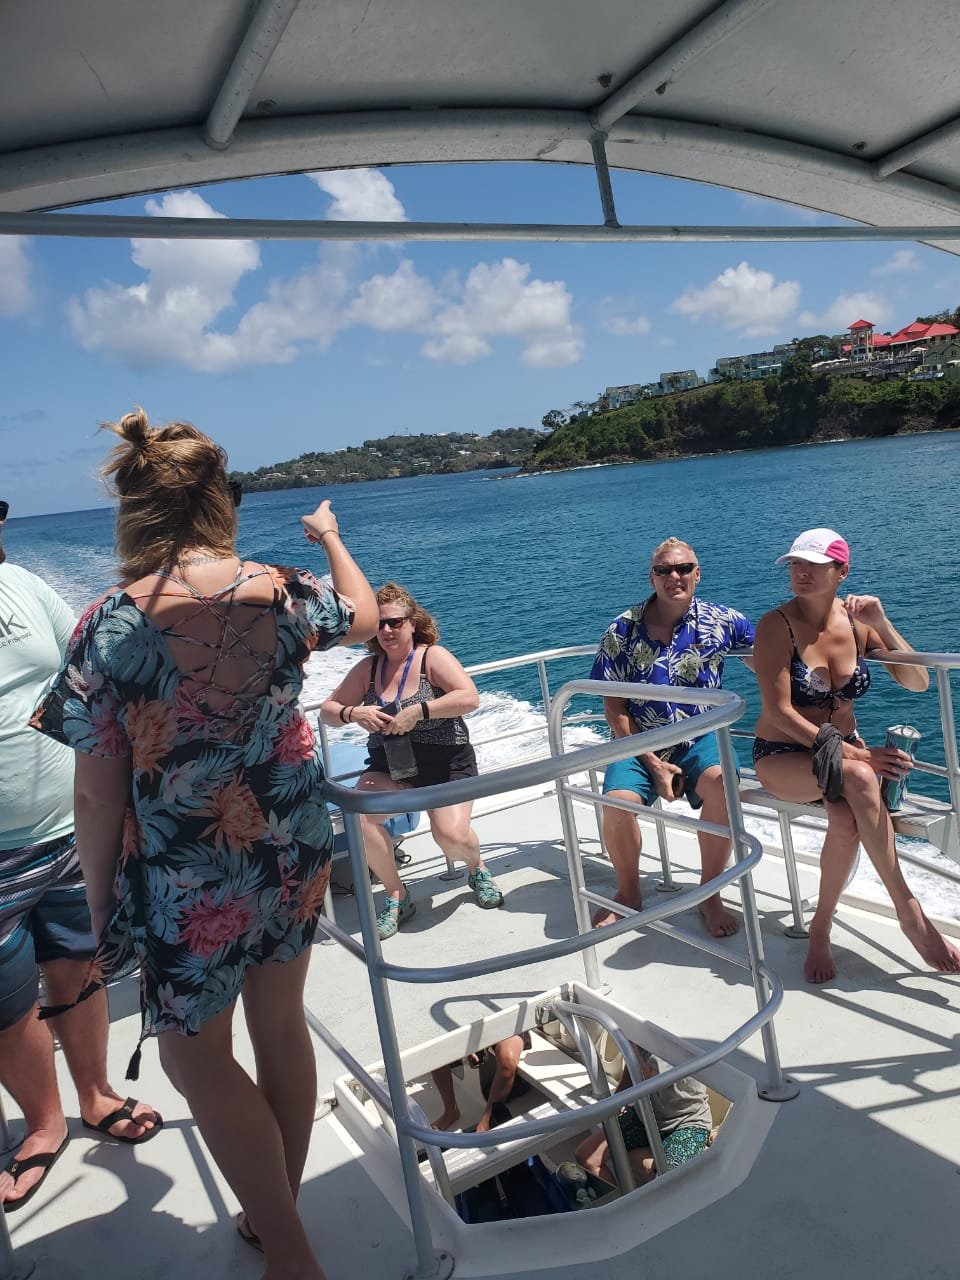 Tourists on Boat-St. Lucia